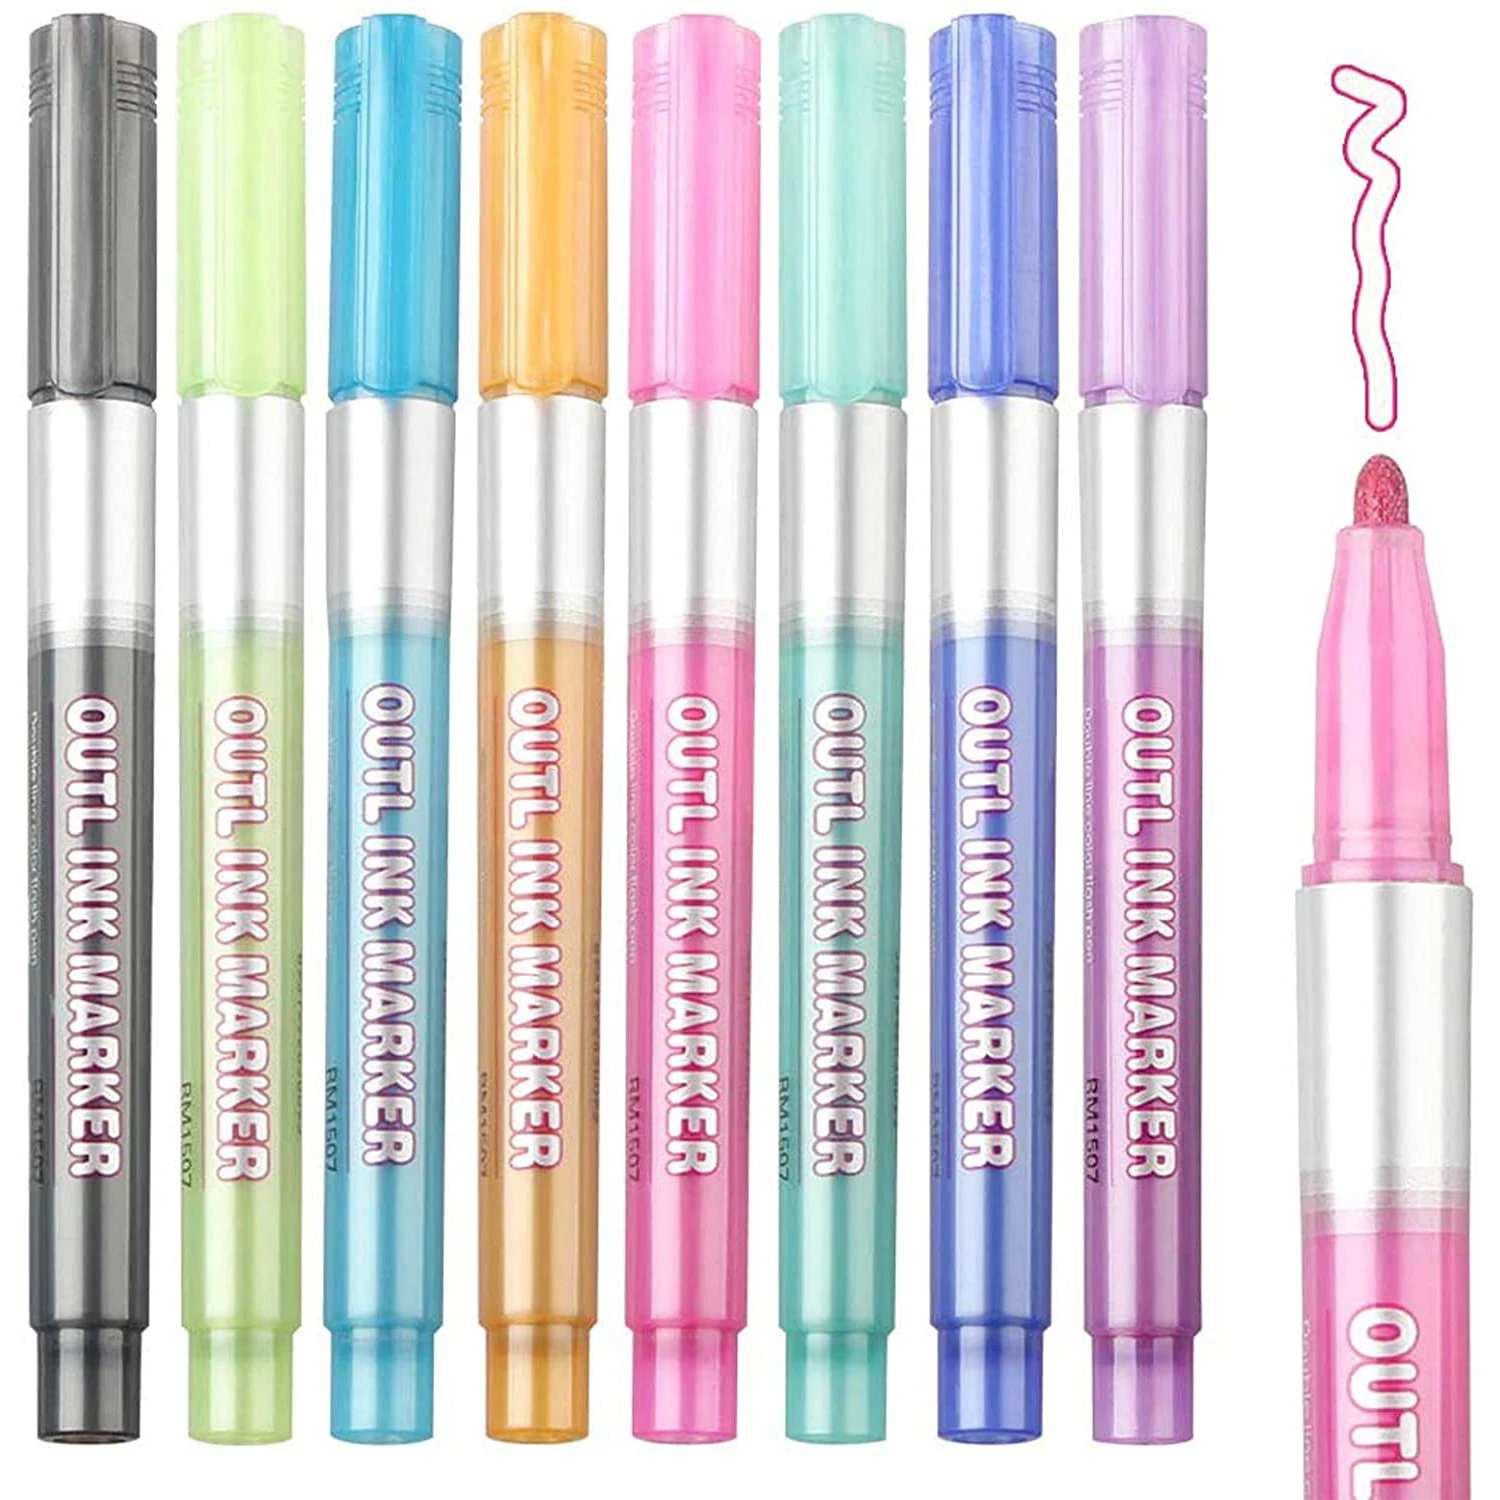 Doodle Dazzle Markers,8 Colors Double Line Outline Metallic Markers,Shimmer Markers Pens Highlight Markers for Kids,Gift Card